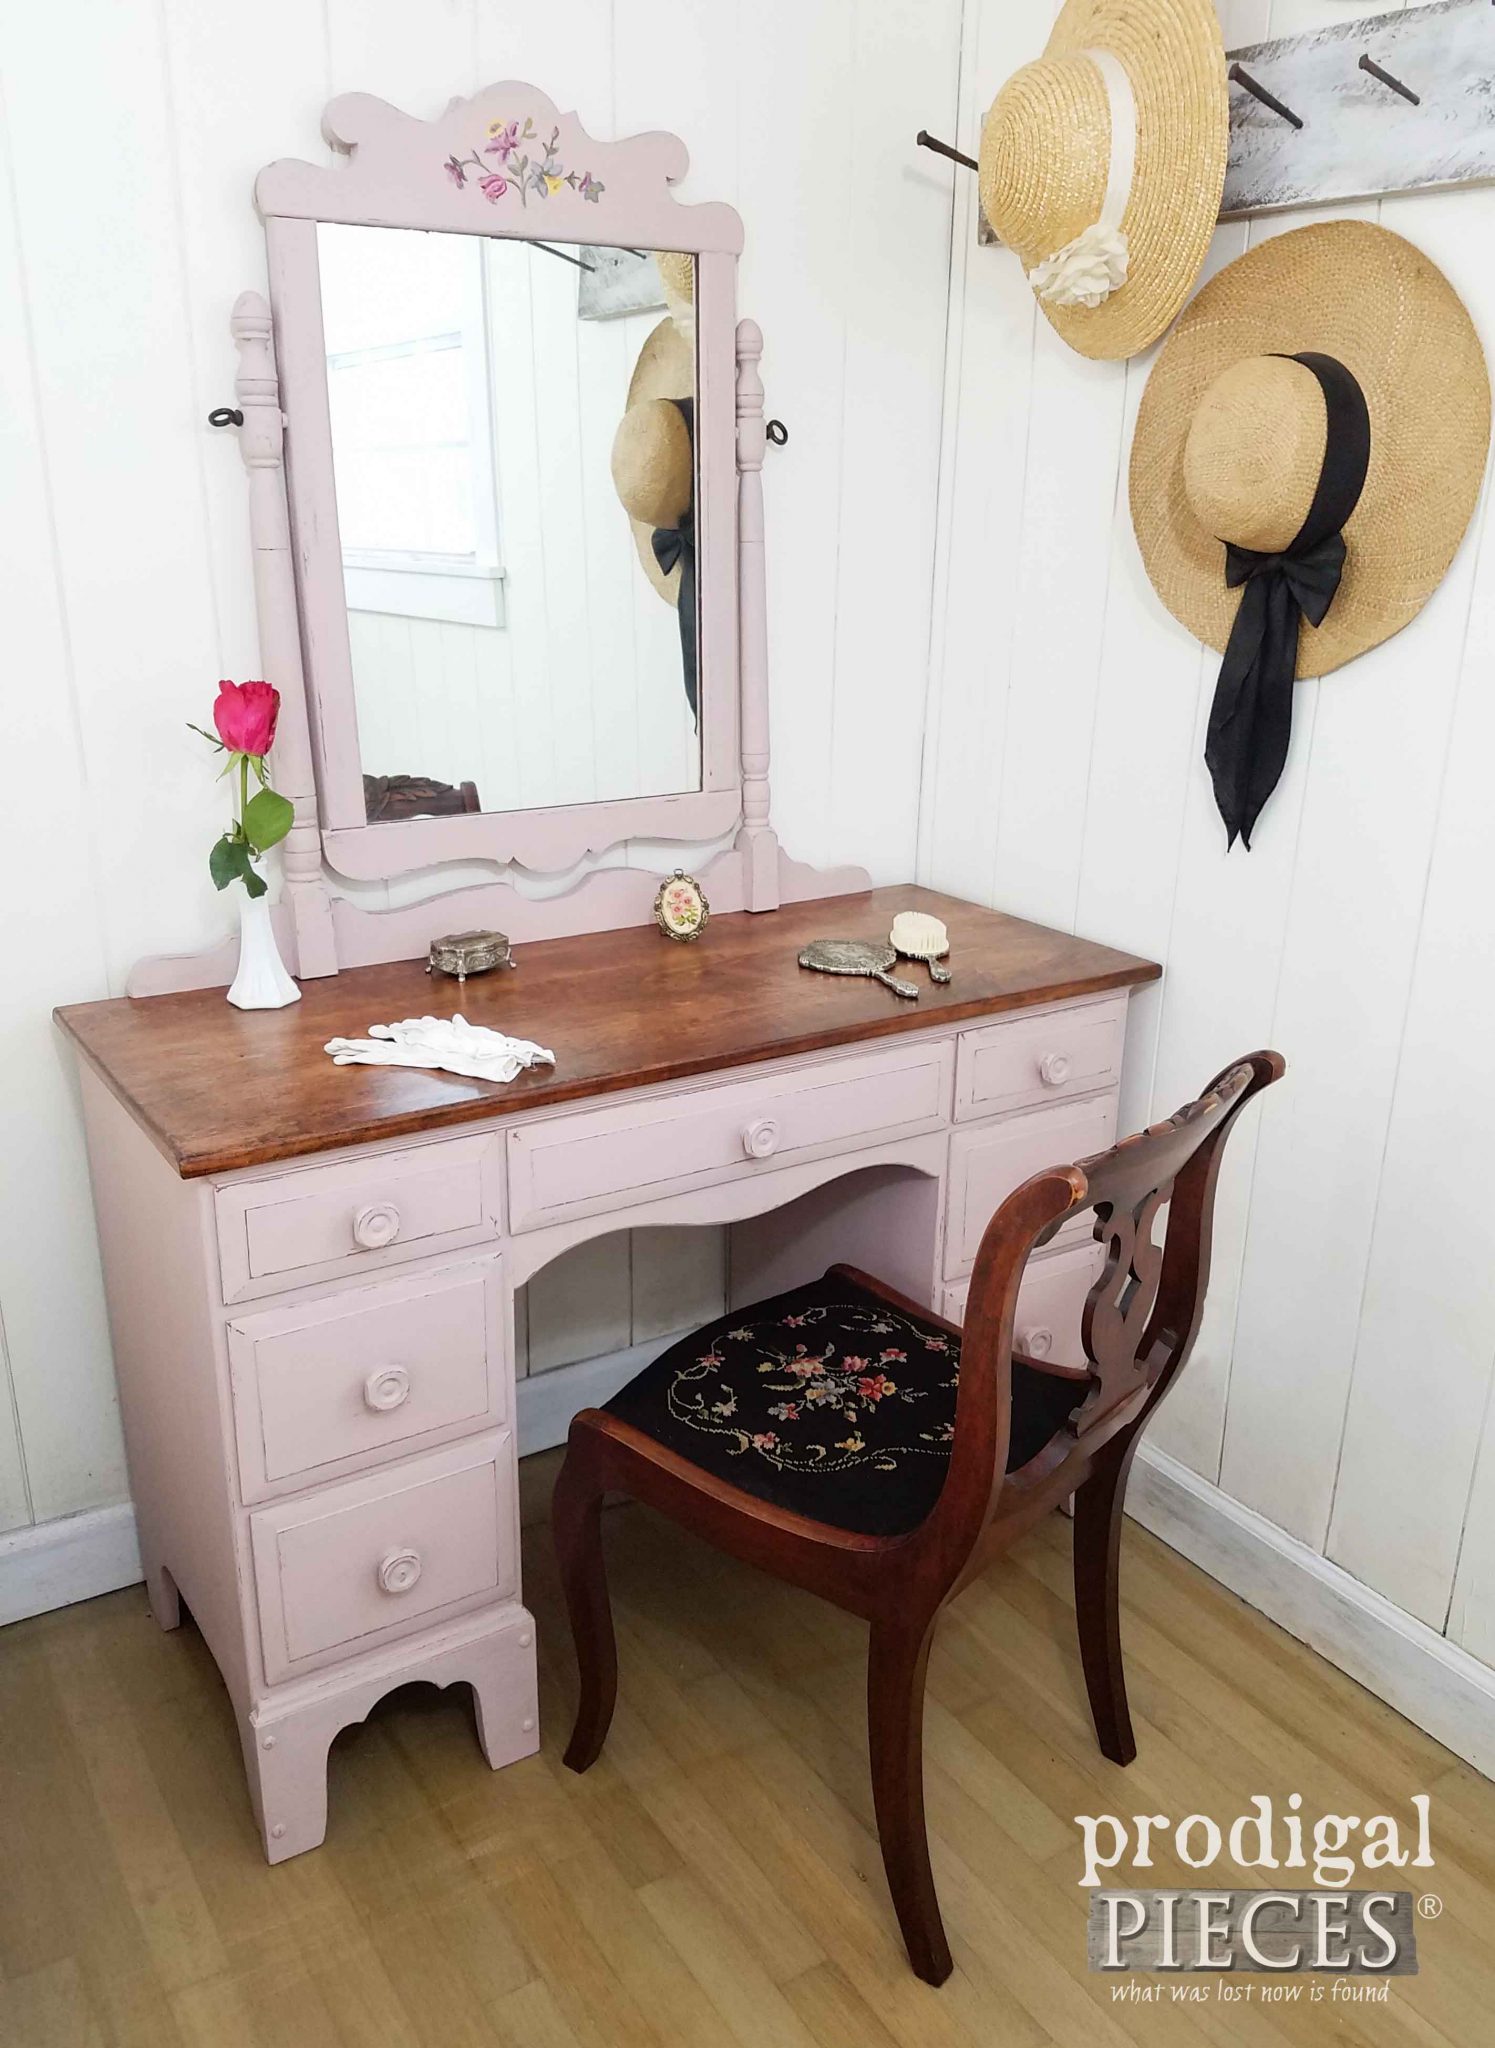 Farmhouse Chic Vintage Vanity Makeover by Prodigal Pieces | prodigalpieces.com